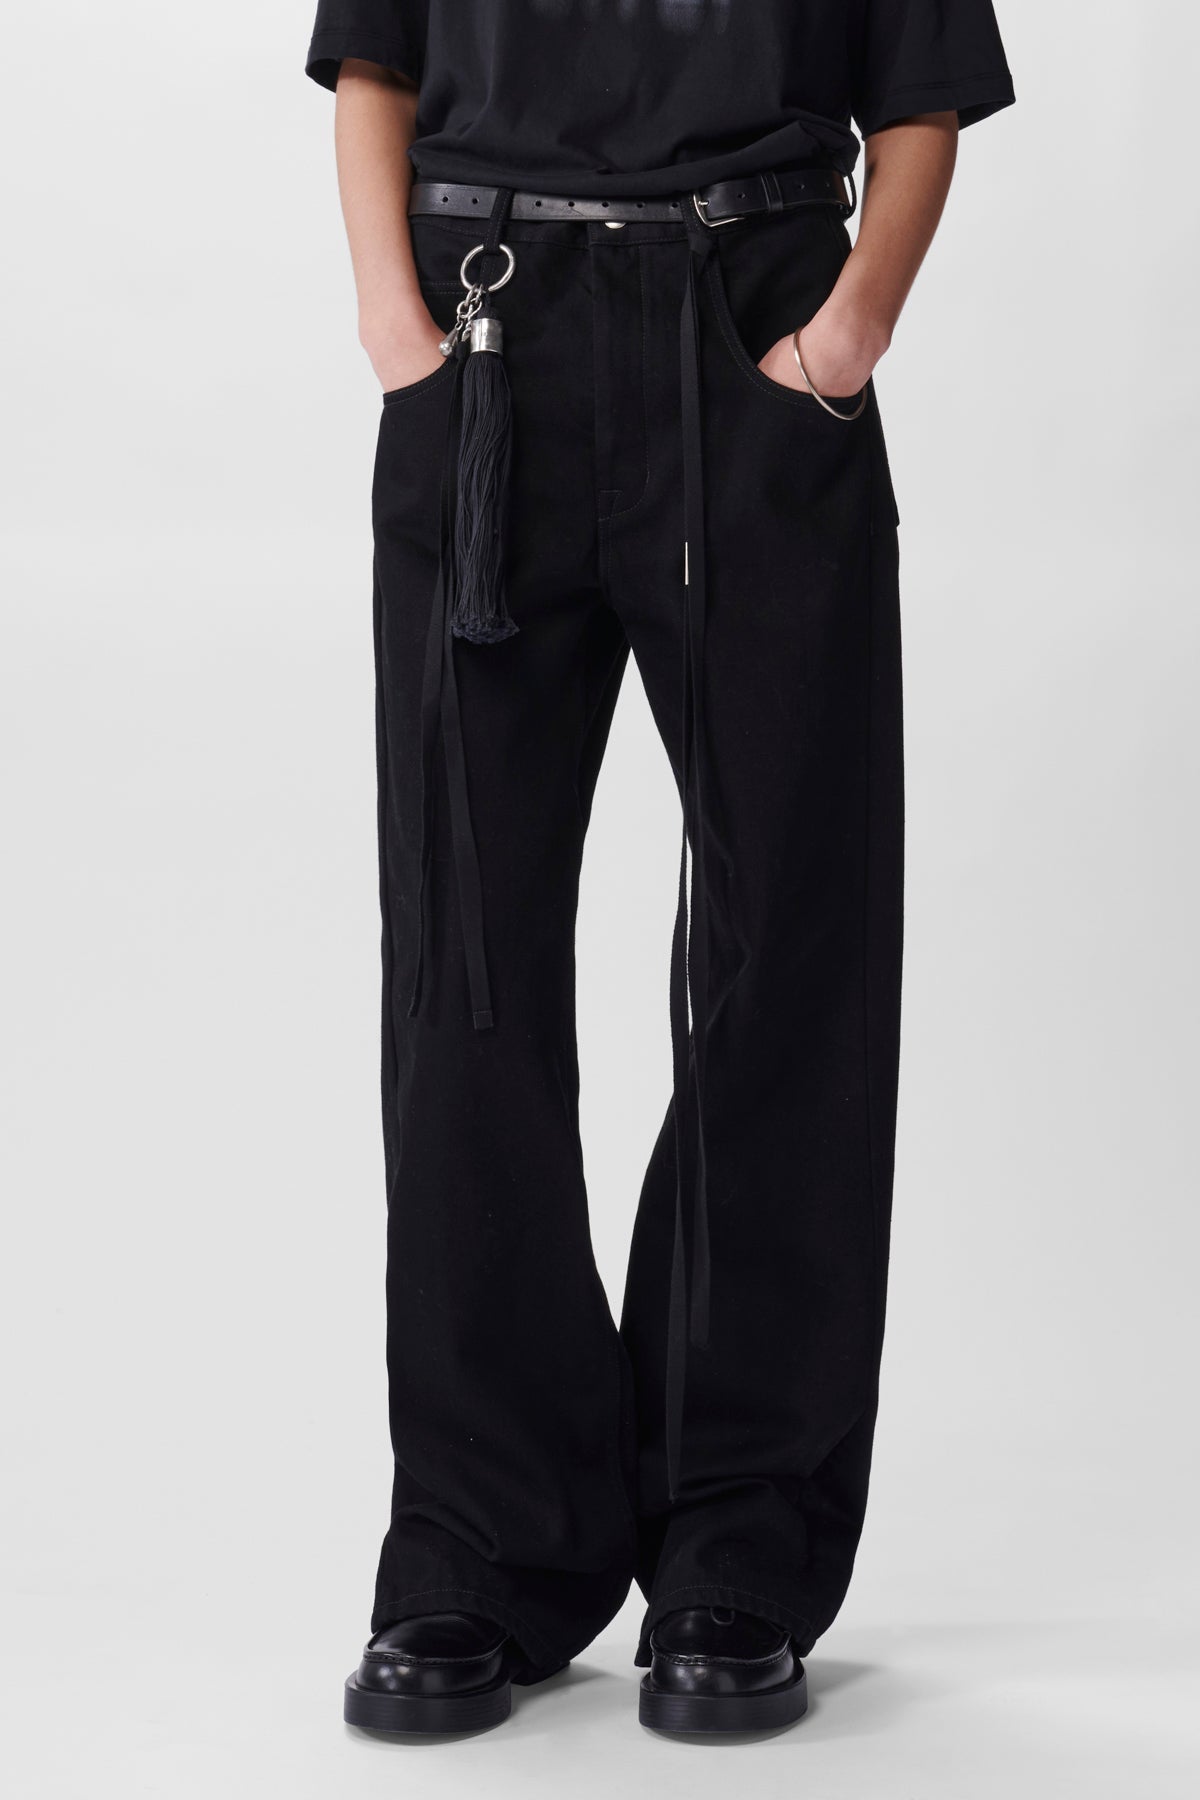 Trousers Collection   Ann Demeulemeester – Tagged "WOMEN"